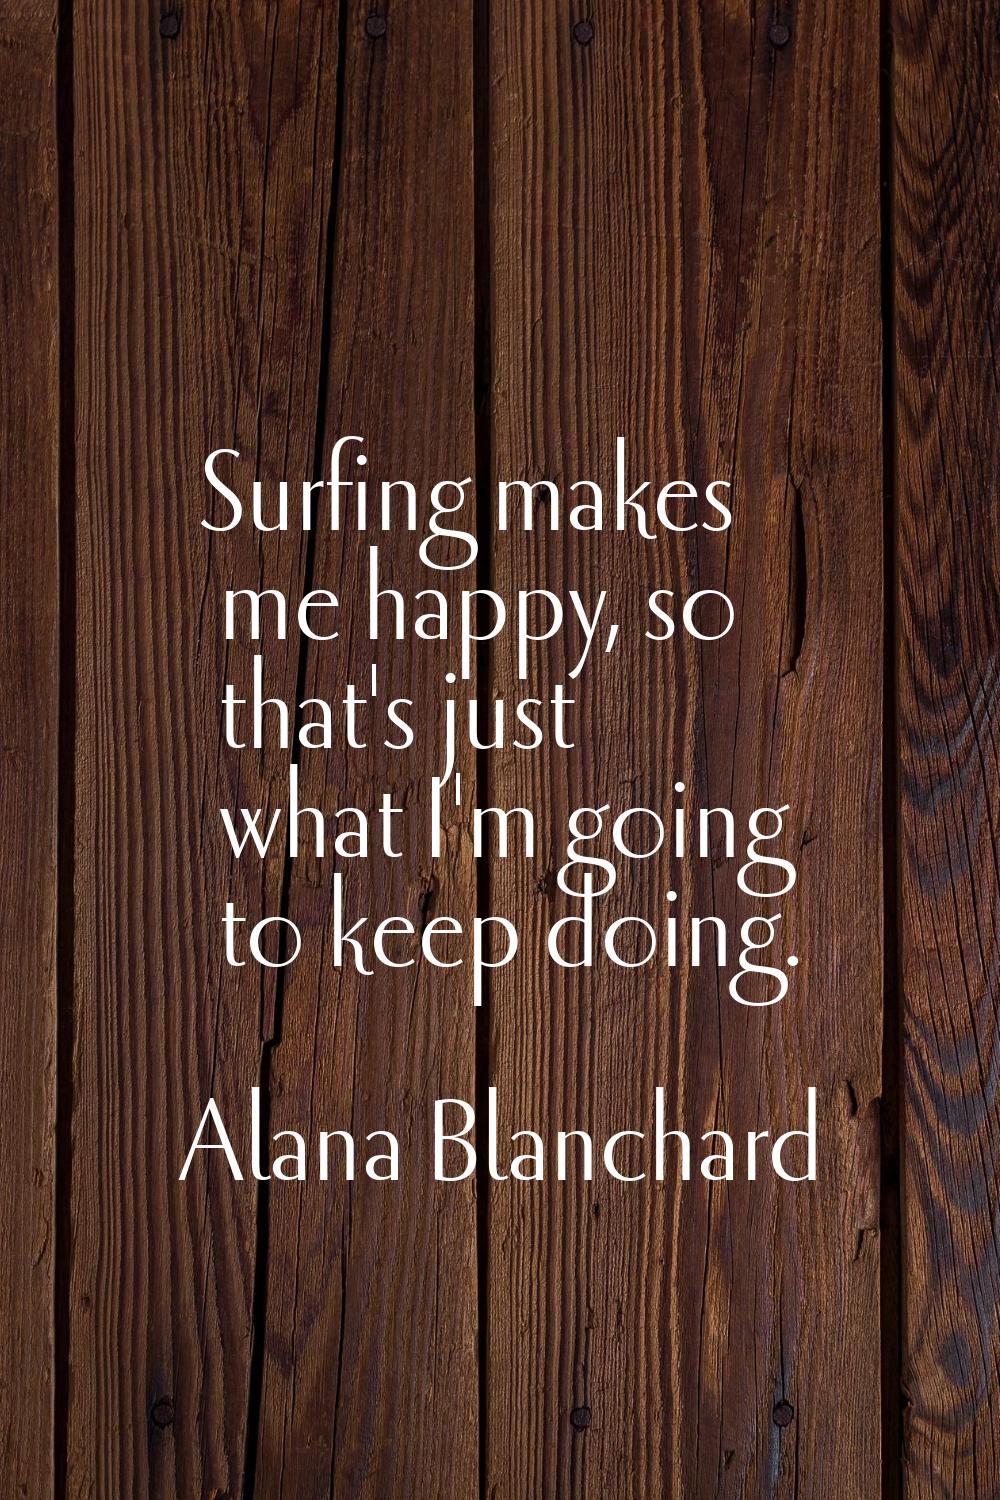 Surfing makes me happy, so that's just what I'm going to keep doing.